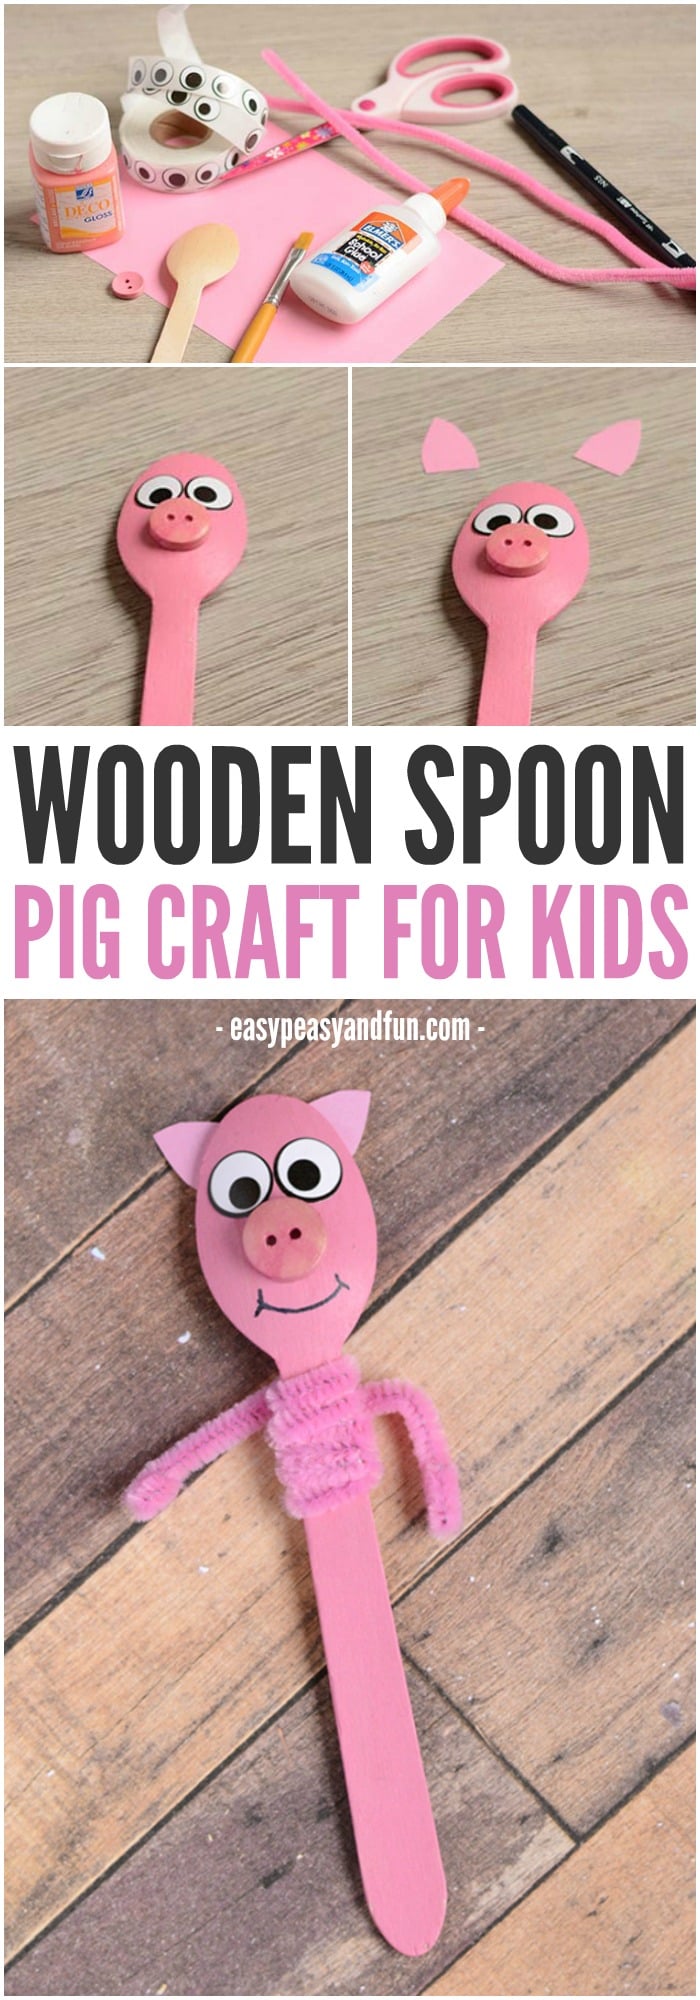 Adorable Wooden Spoon Pig Craft